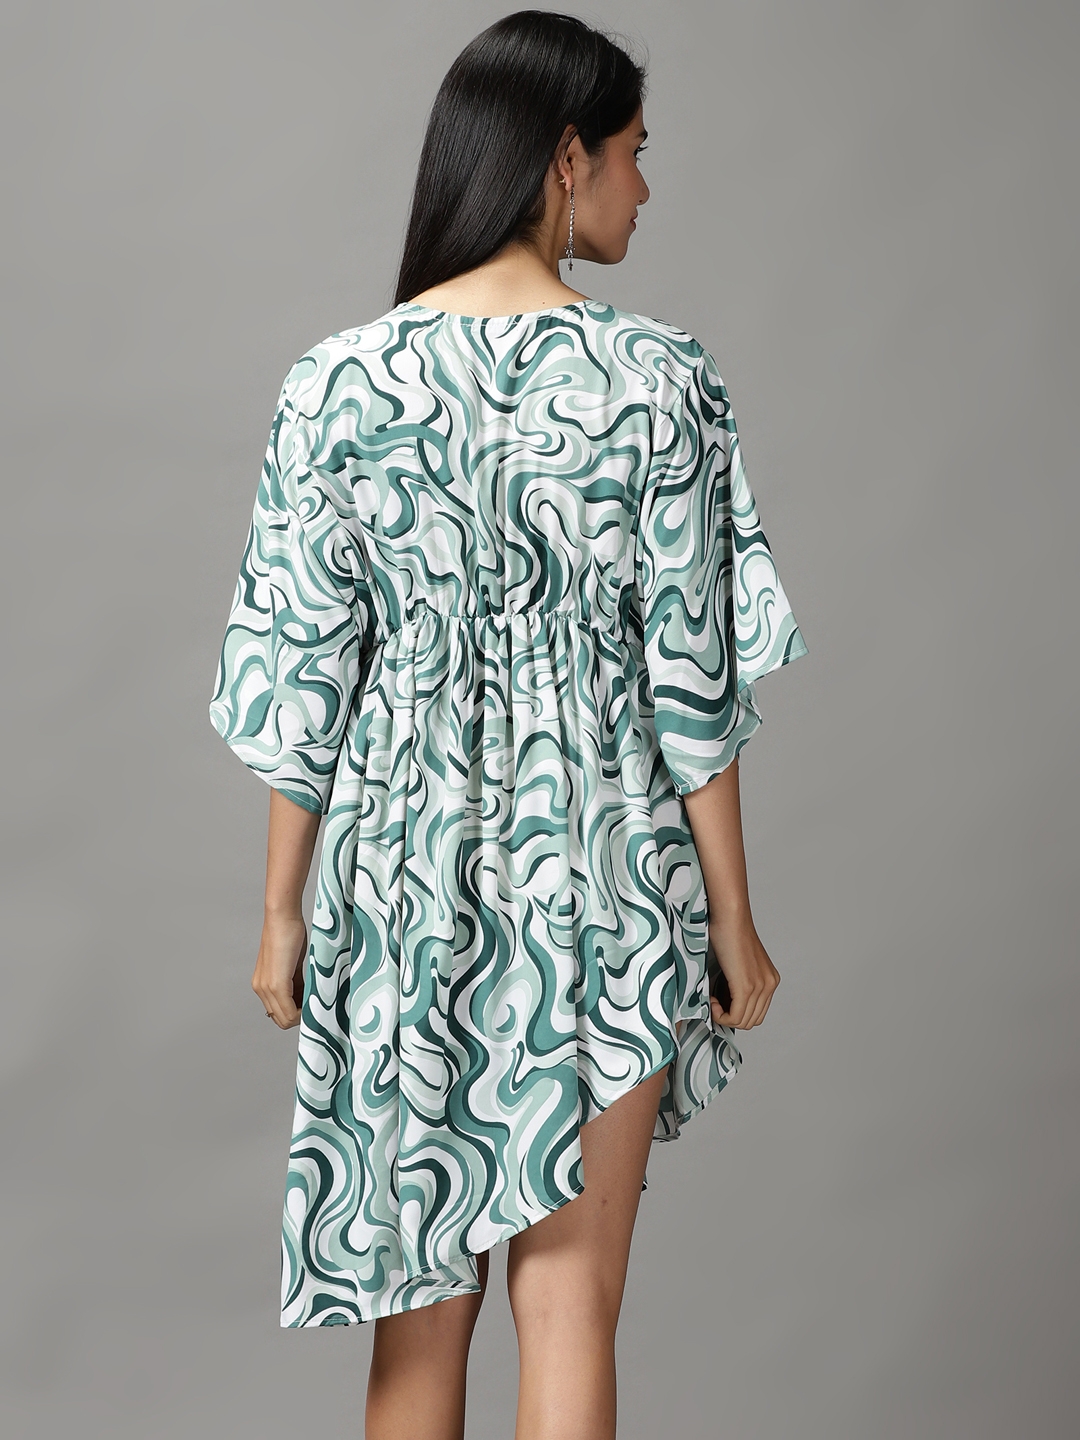 Women's Green Polyester Printed Dresses